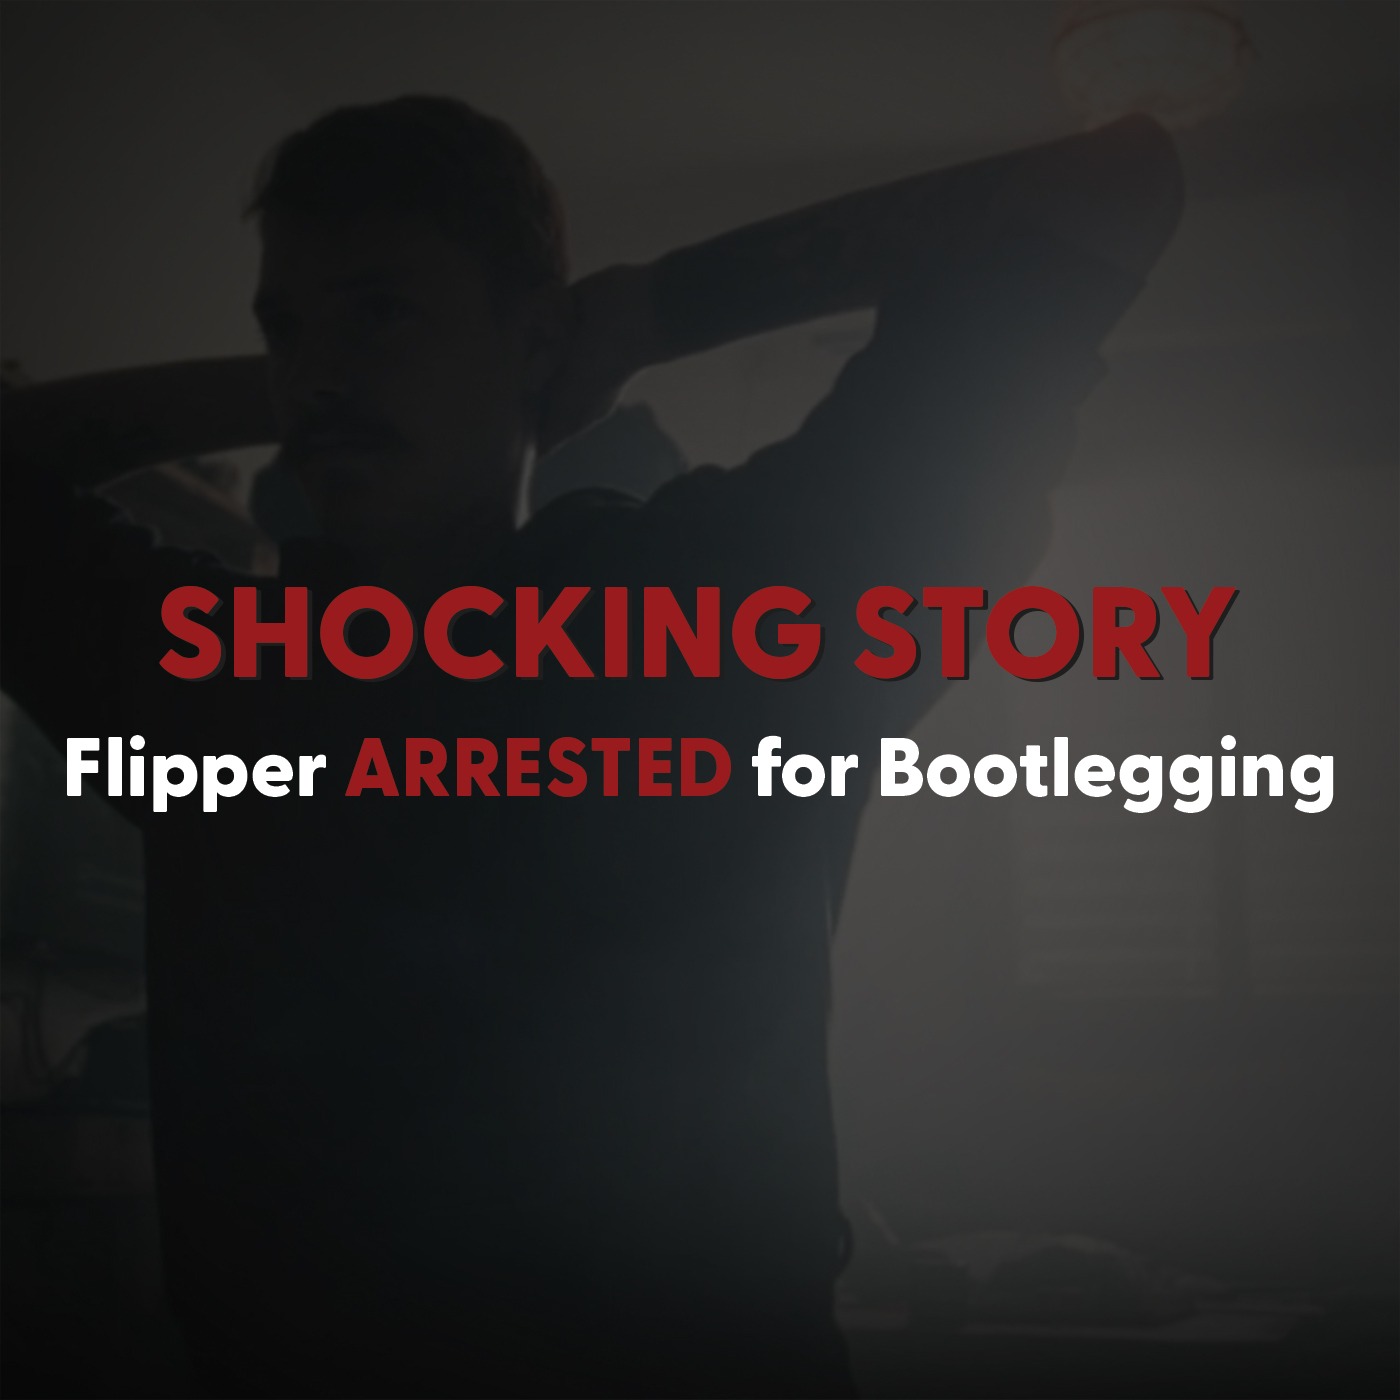 SHOCKING STORY! The First Flipper Arrested for Bootlegging!